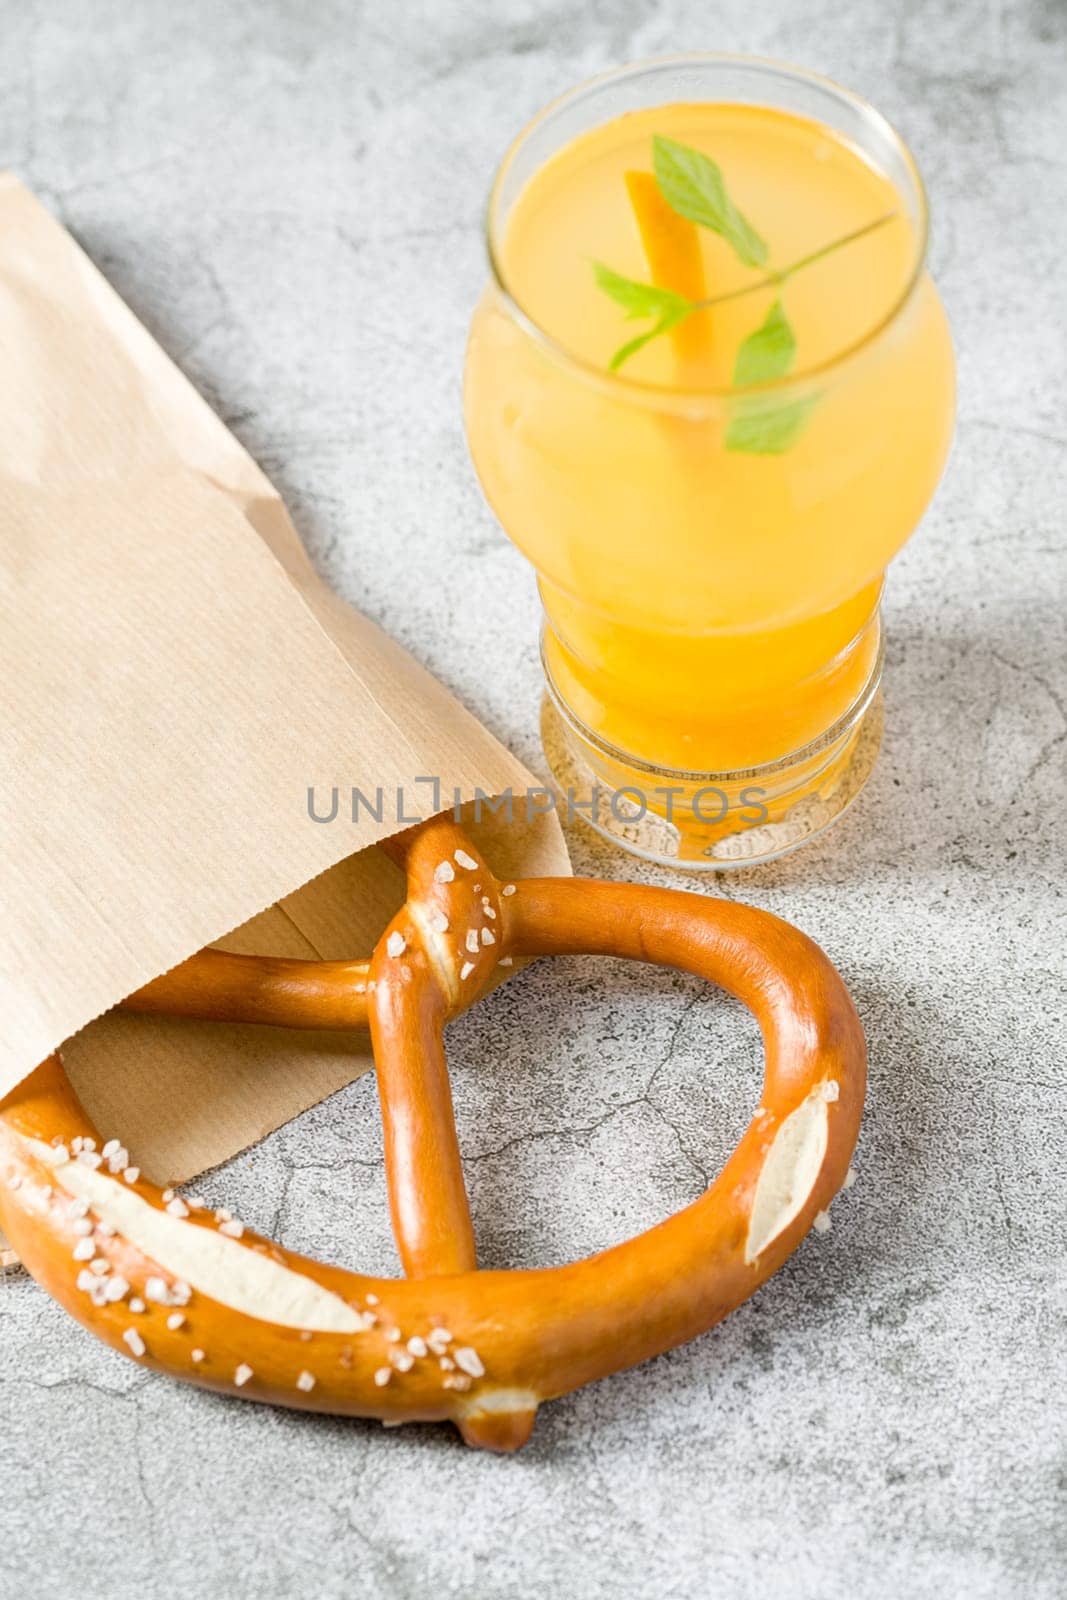 Pretzel wrapped in wrapping paper with drink next to it on stone table by Sonat